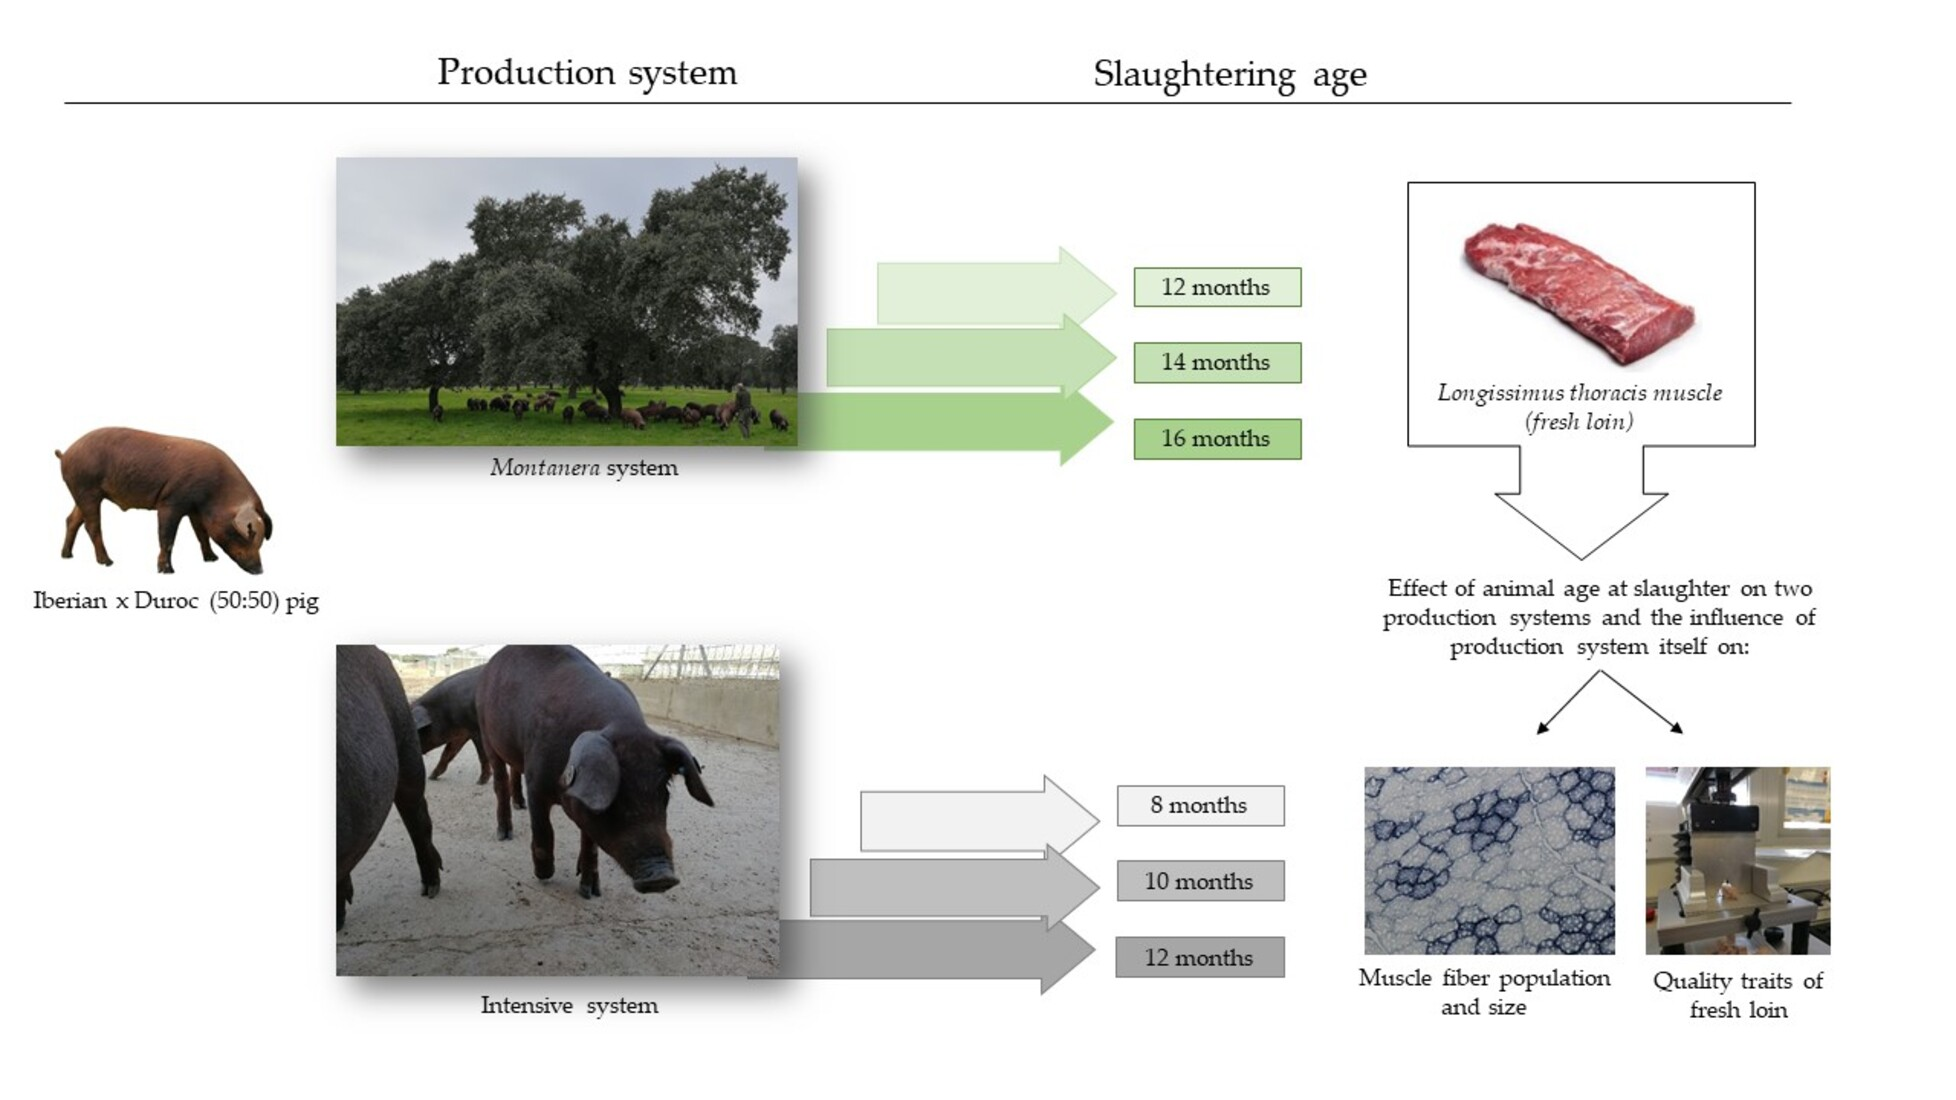 Animals | Free Full-Text | Effect of Animal Age at Slaughter on the Muscle  Fibres of Longissimus thoracis and Meat Quality of Fresh Loin from Iberian  × Duroc Crossbred Pig under Two